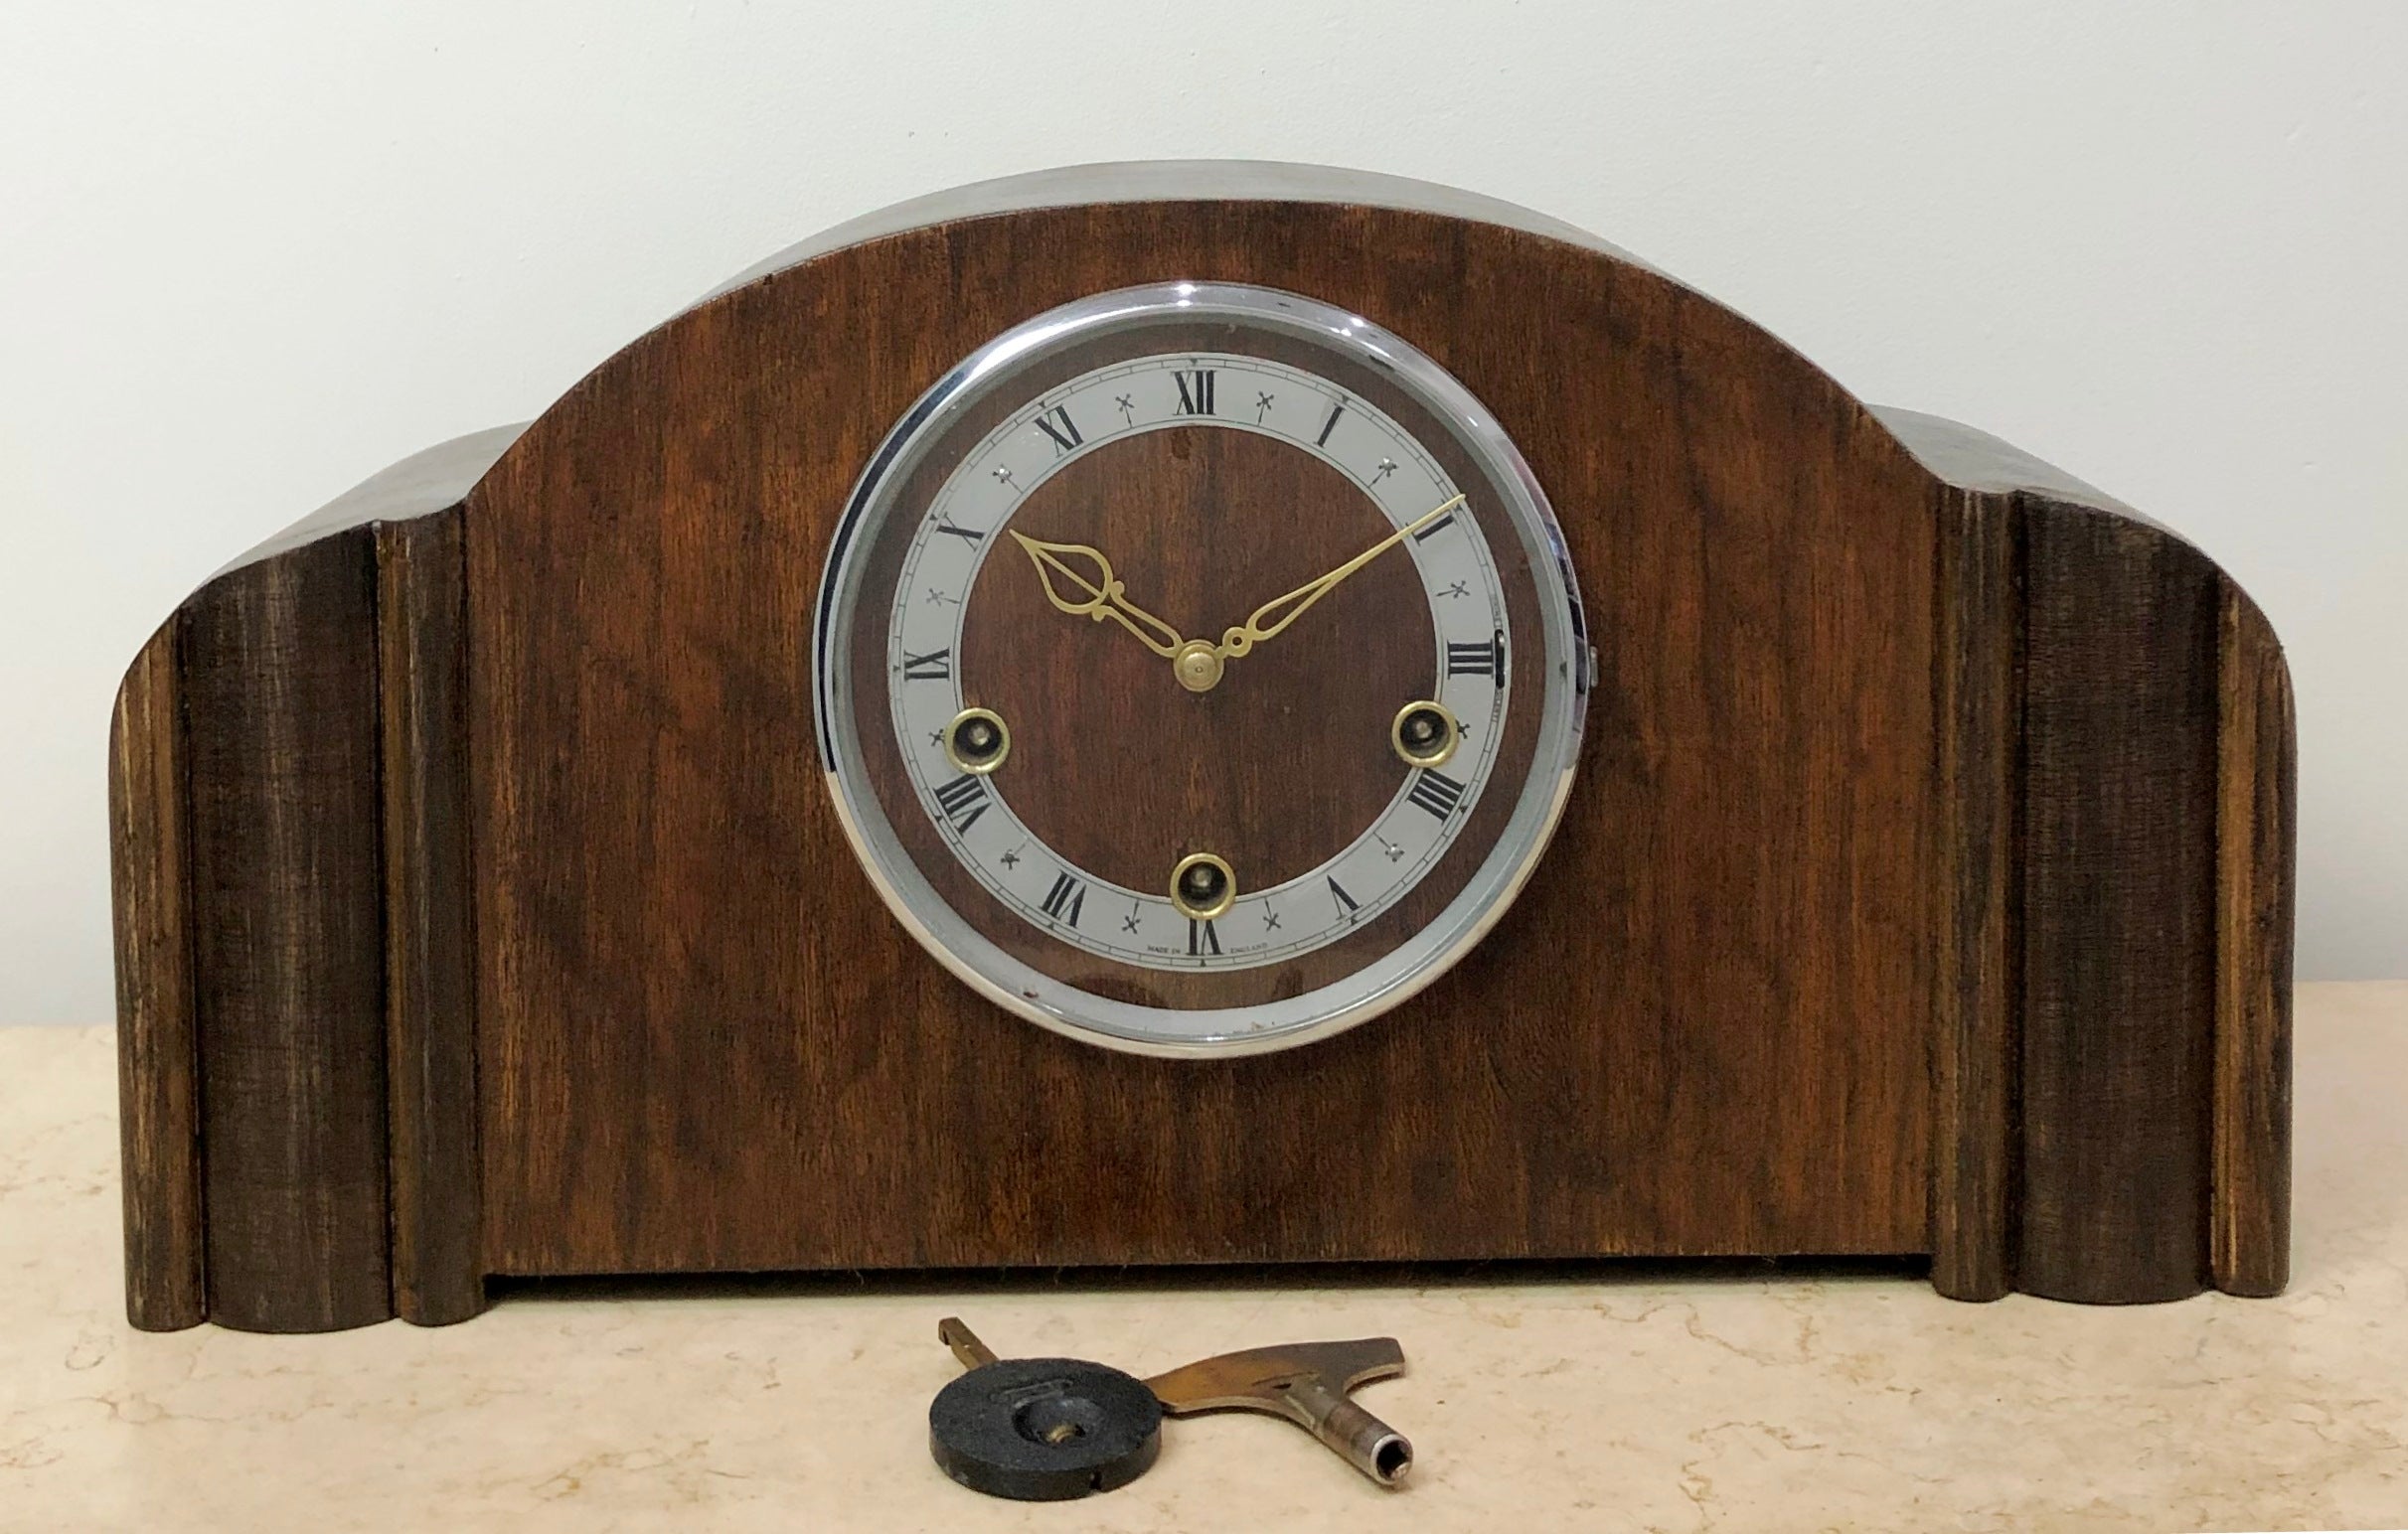 Vintage Westminster Chime Hammer on Rods England Mantel Clock - eXibit collection